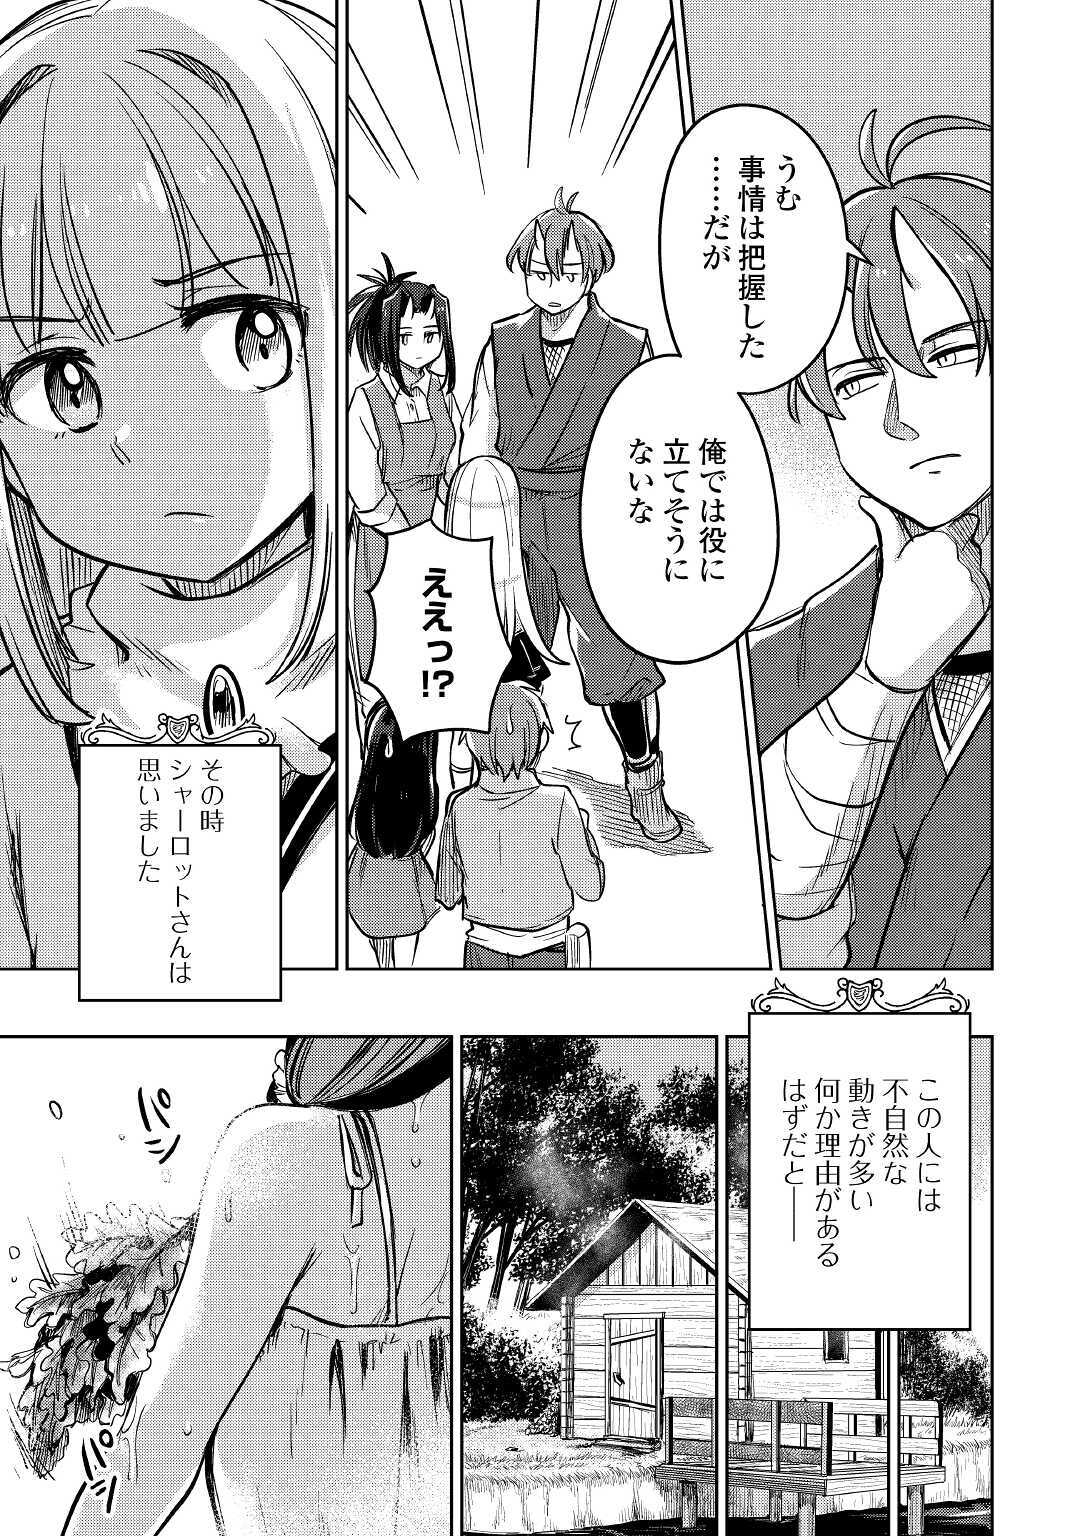 The Former Structural Researcher’s Story of Otherworldly Adventure 第31話 - Page 27